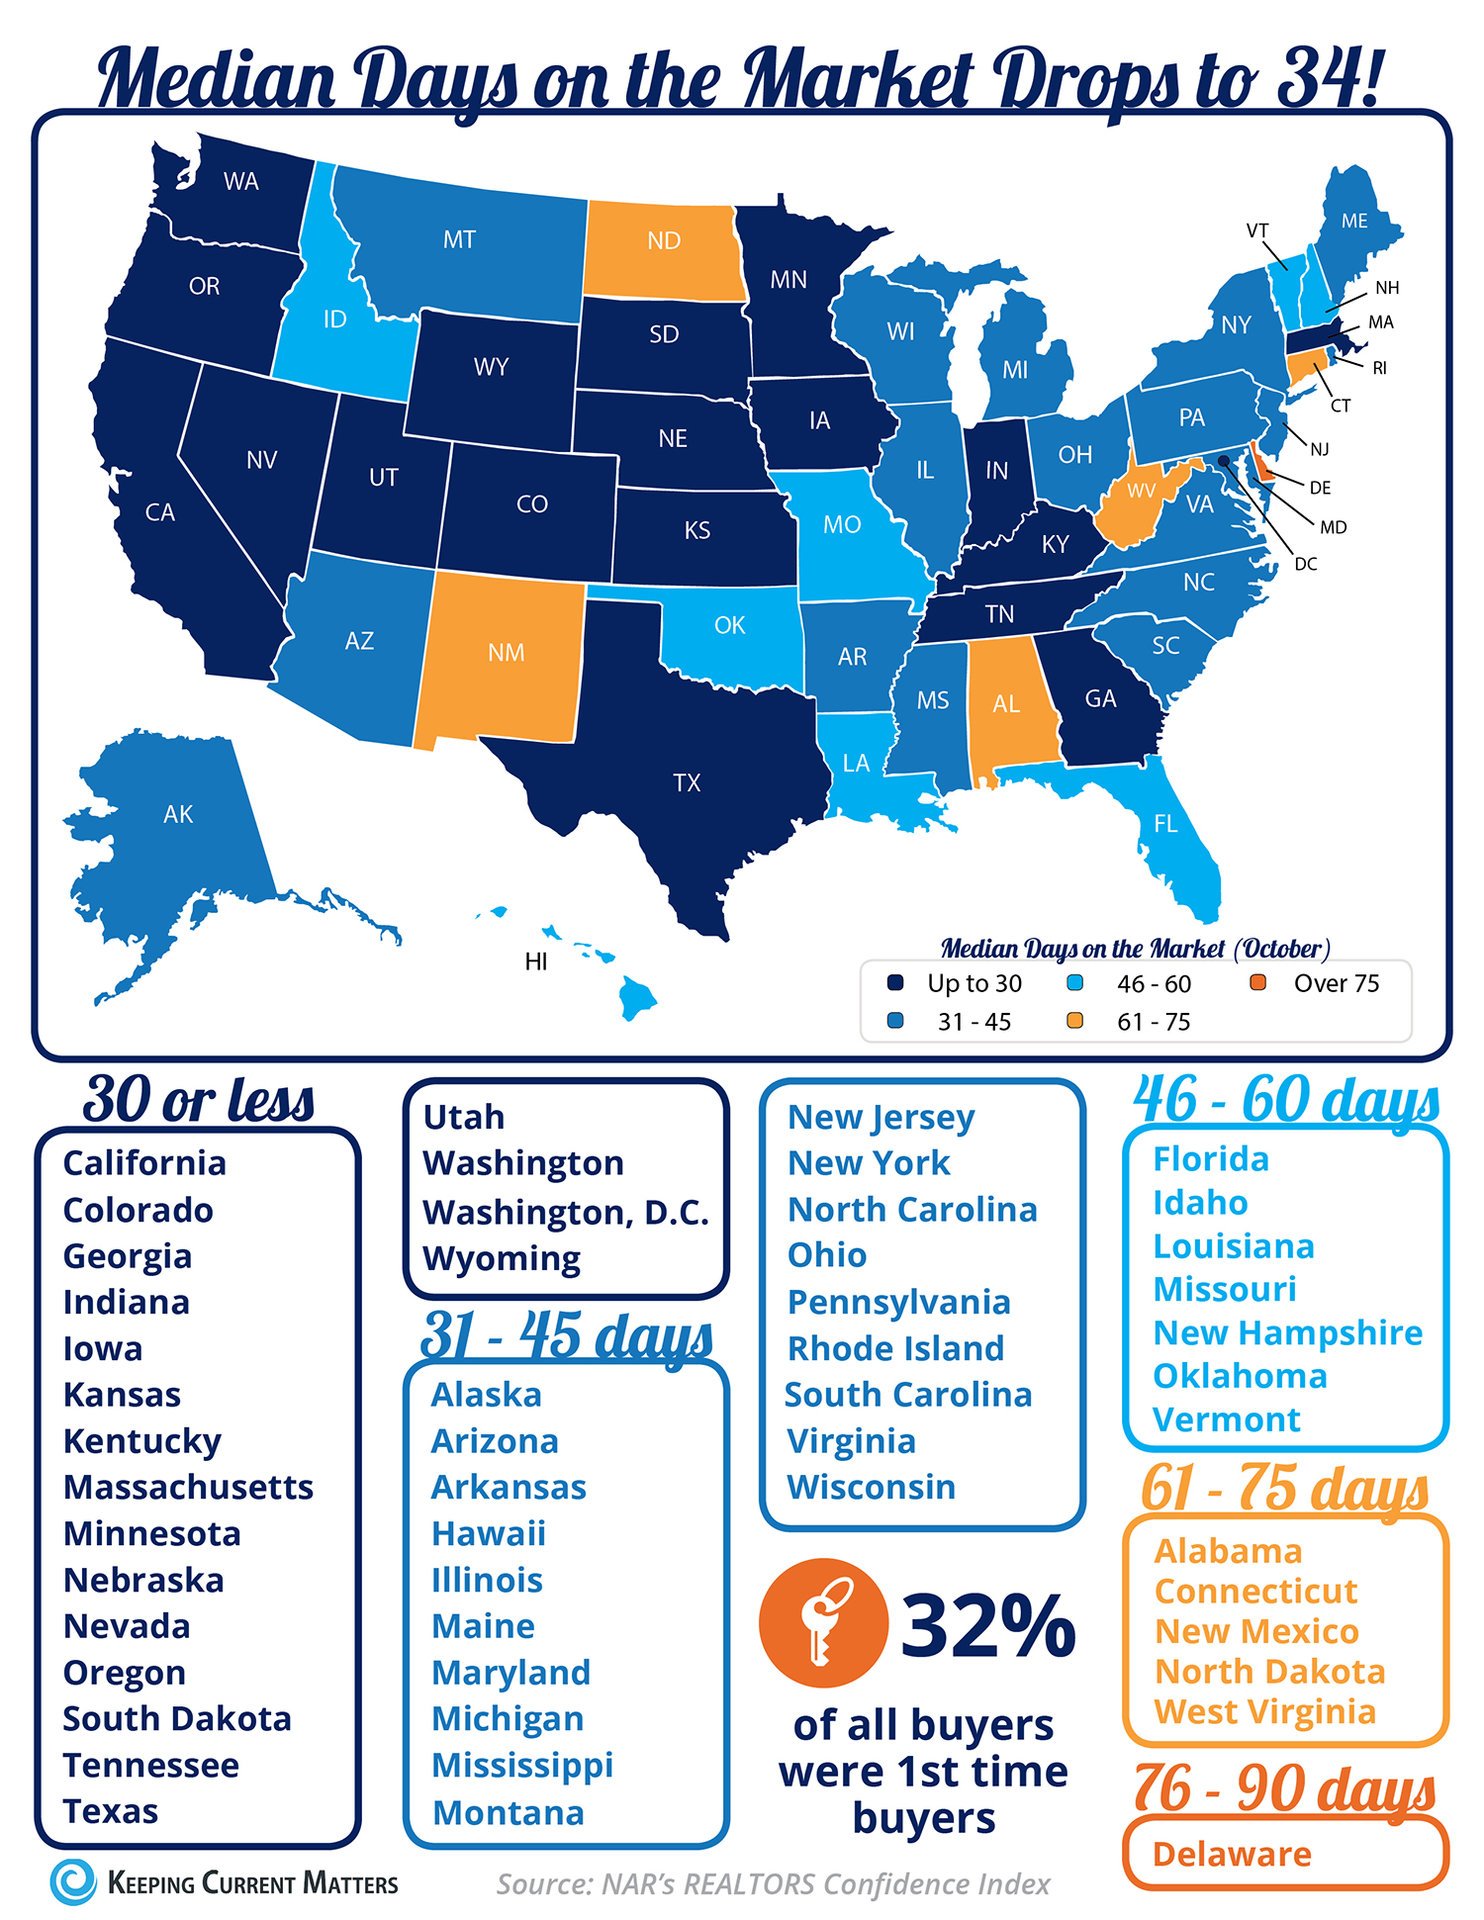 Median Days on the Market Drops to 34! [INFOGRAPHIC] | Keeping Current Matters